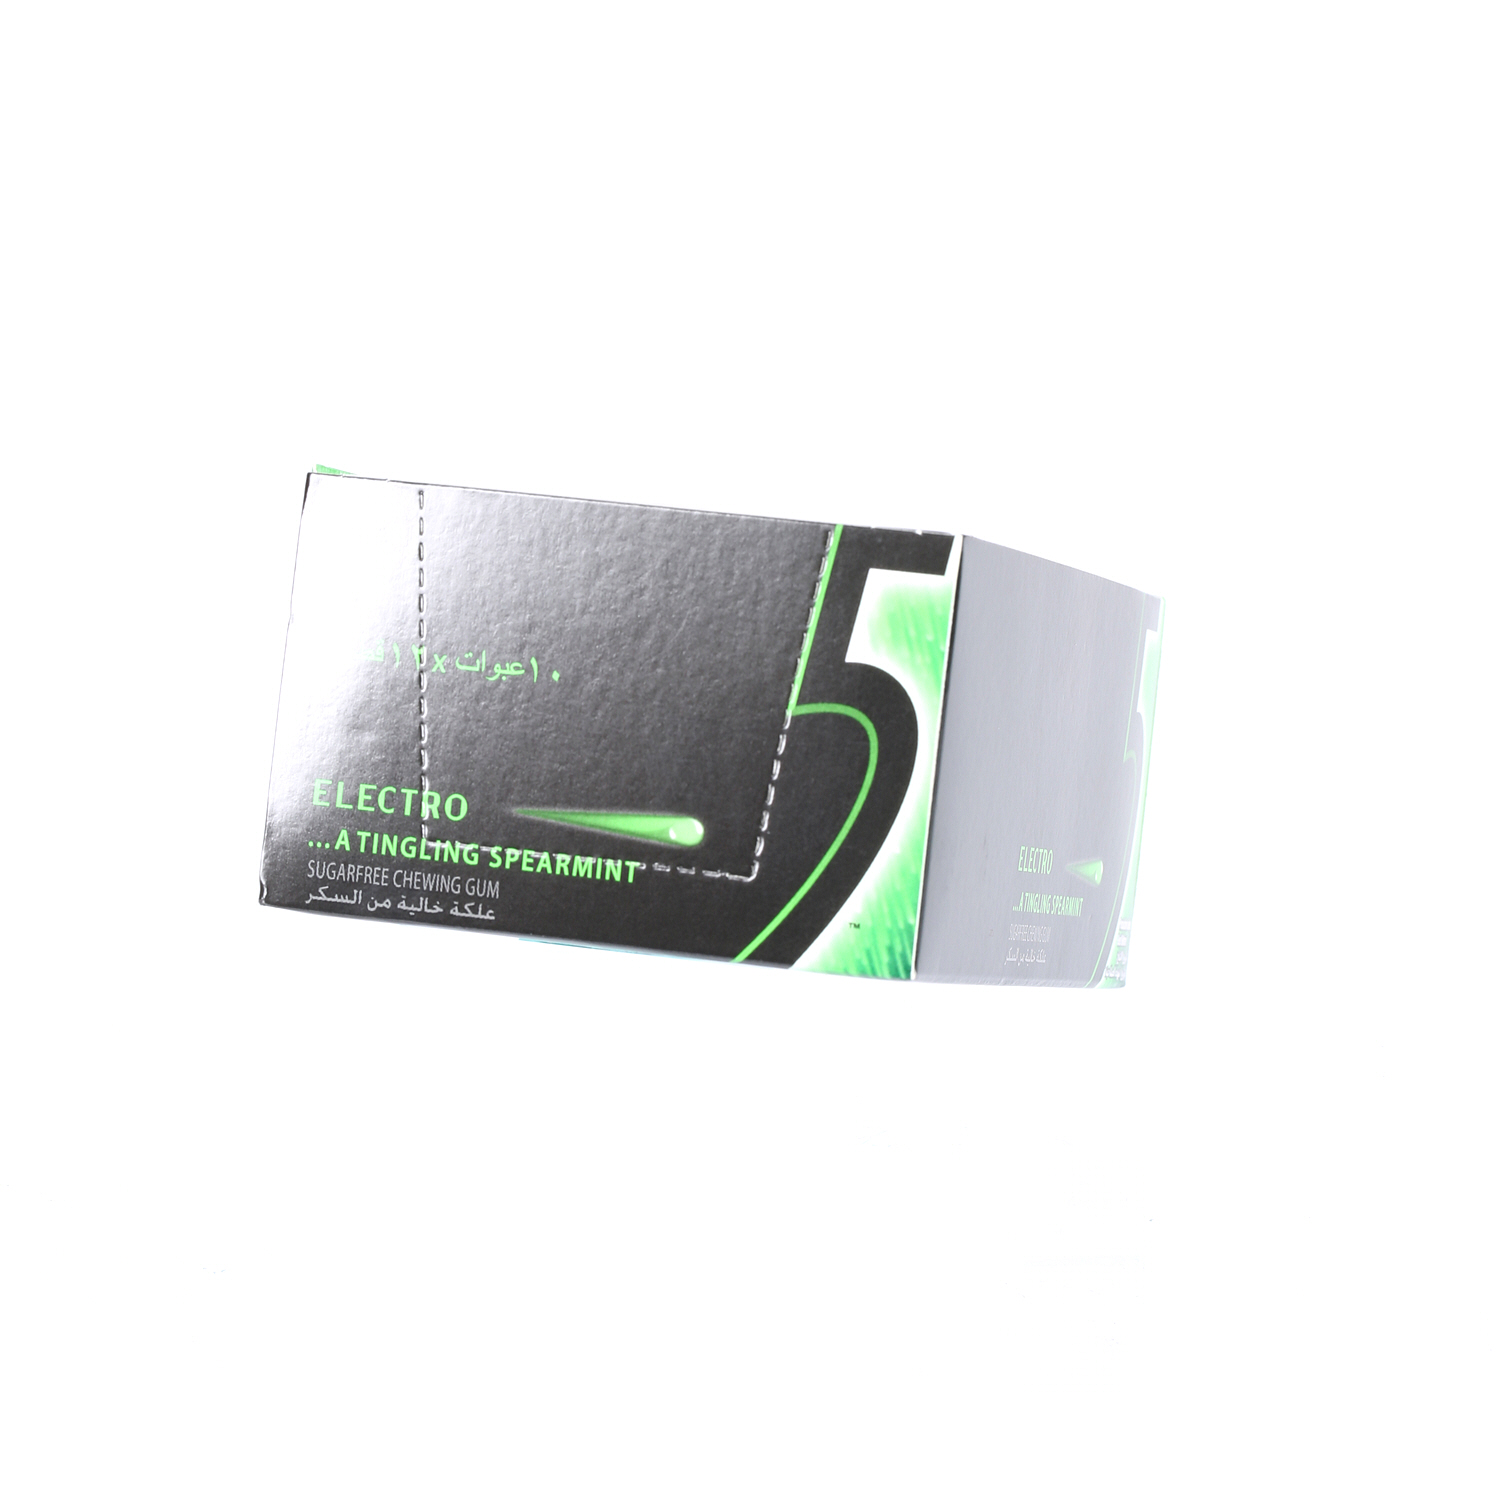 Wrigley's 5 Electro Spearmint Chewing Gum 31.2gm × 10'S